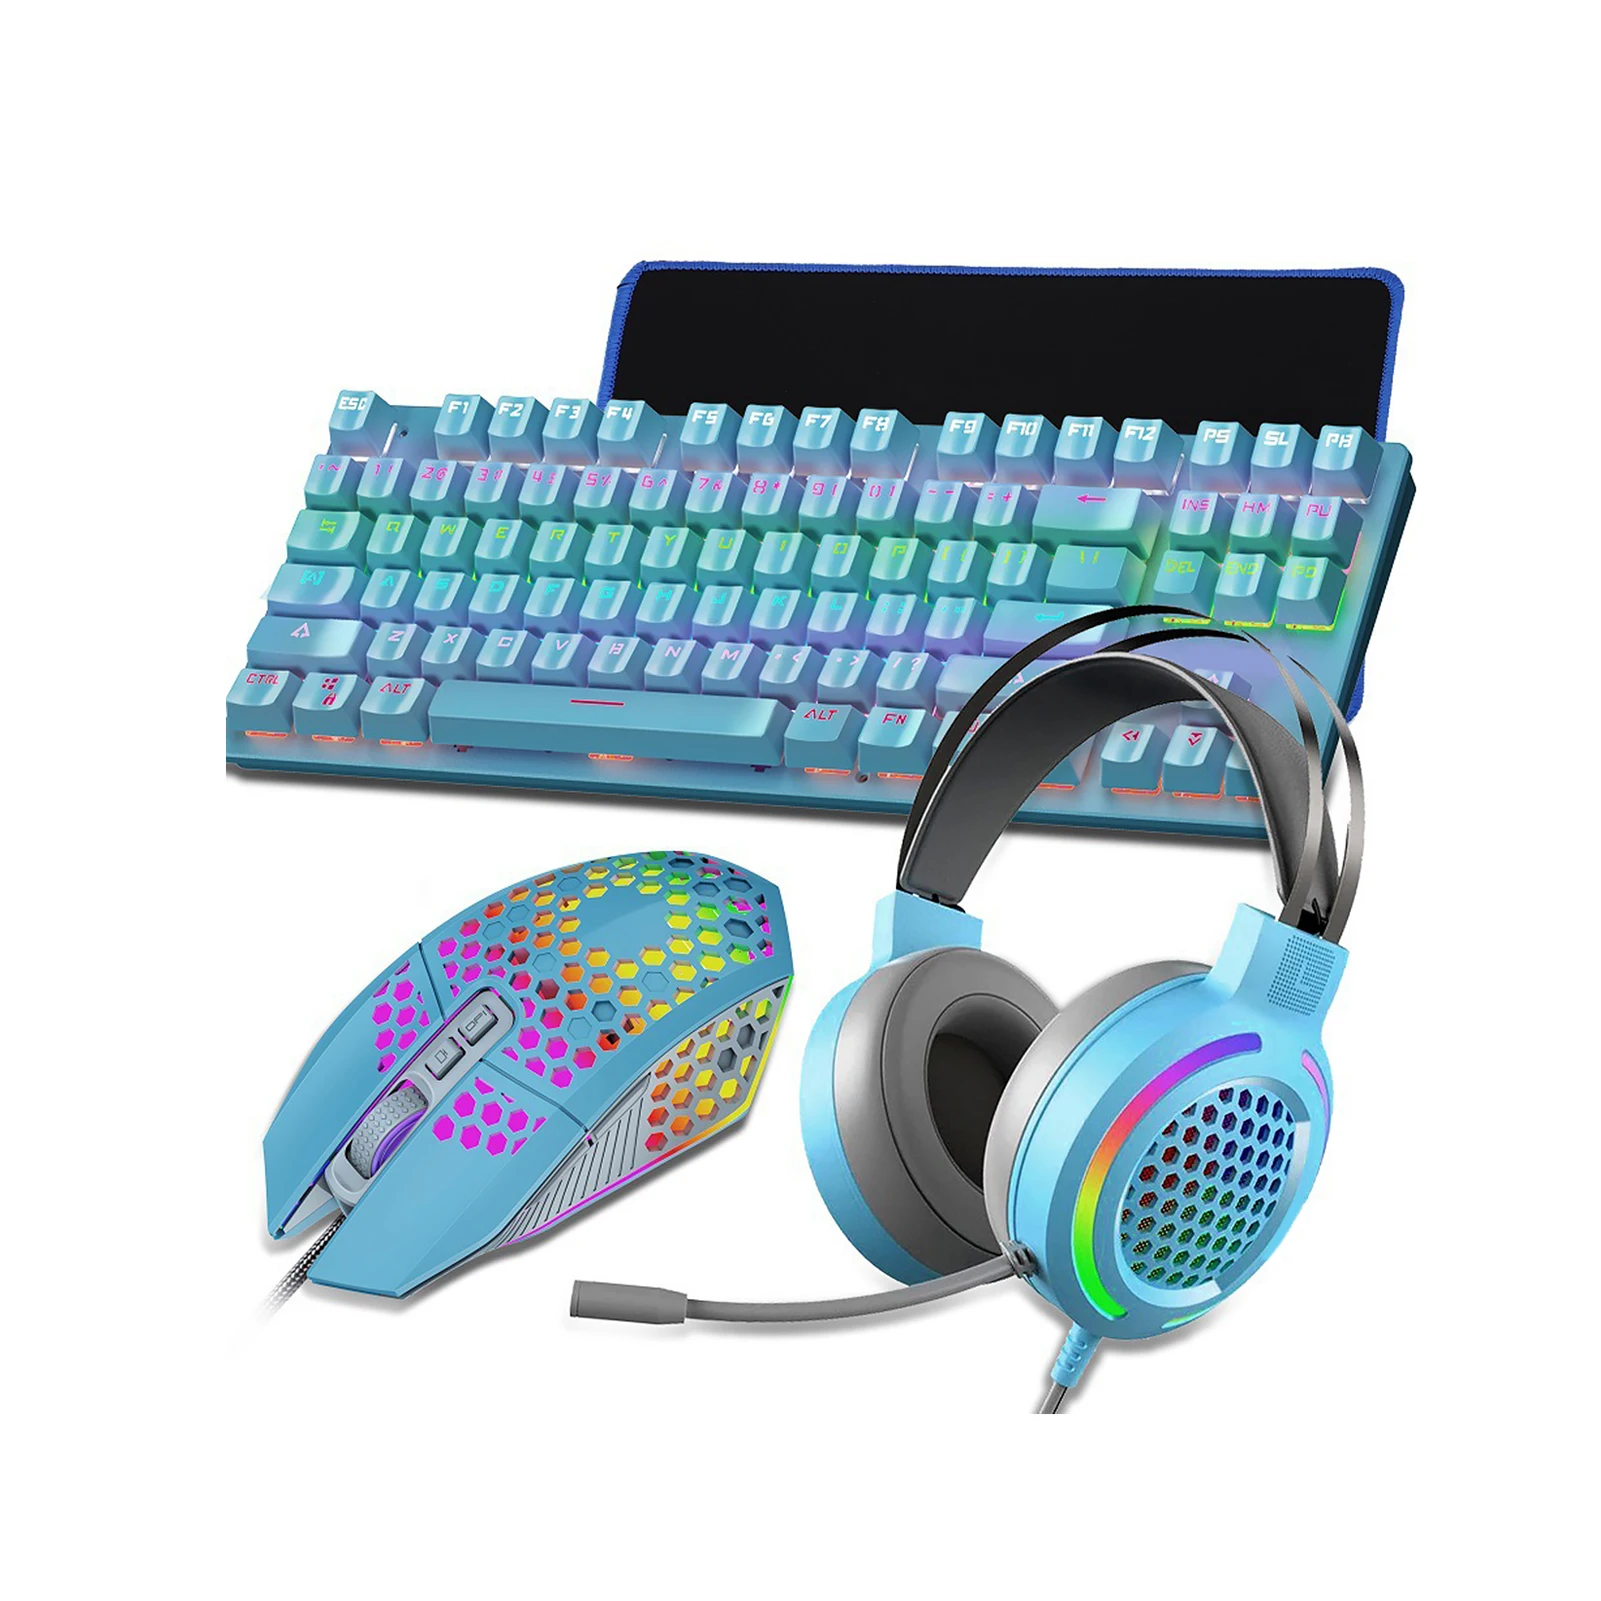 

Combo Mechanical With Mouse Headphone Pad Gaming Keyboard PC USB Wired RGB Backlit PBT Office Mute Gift 87 Keys